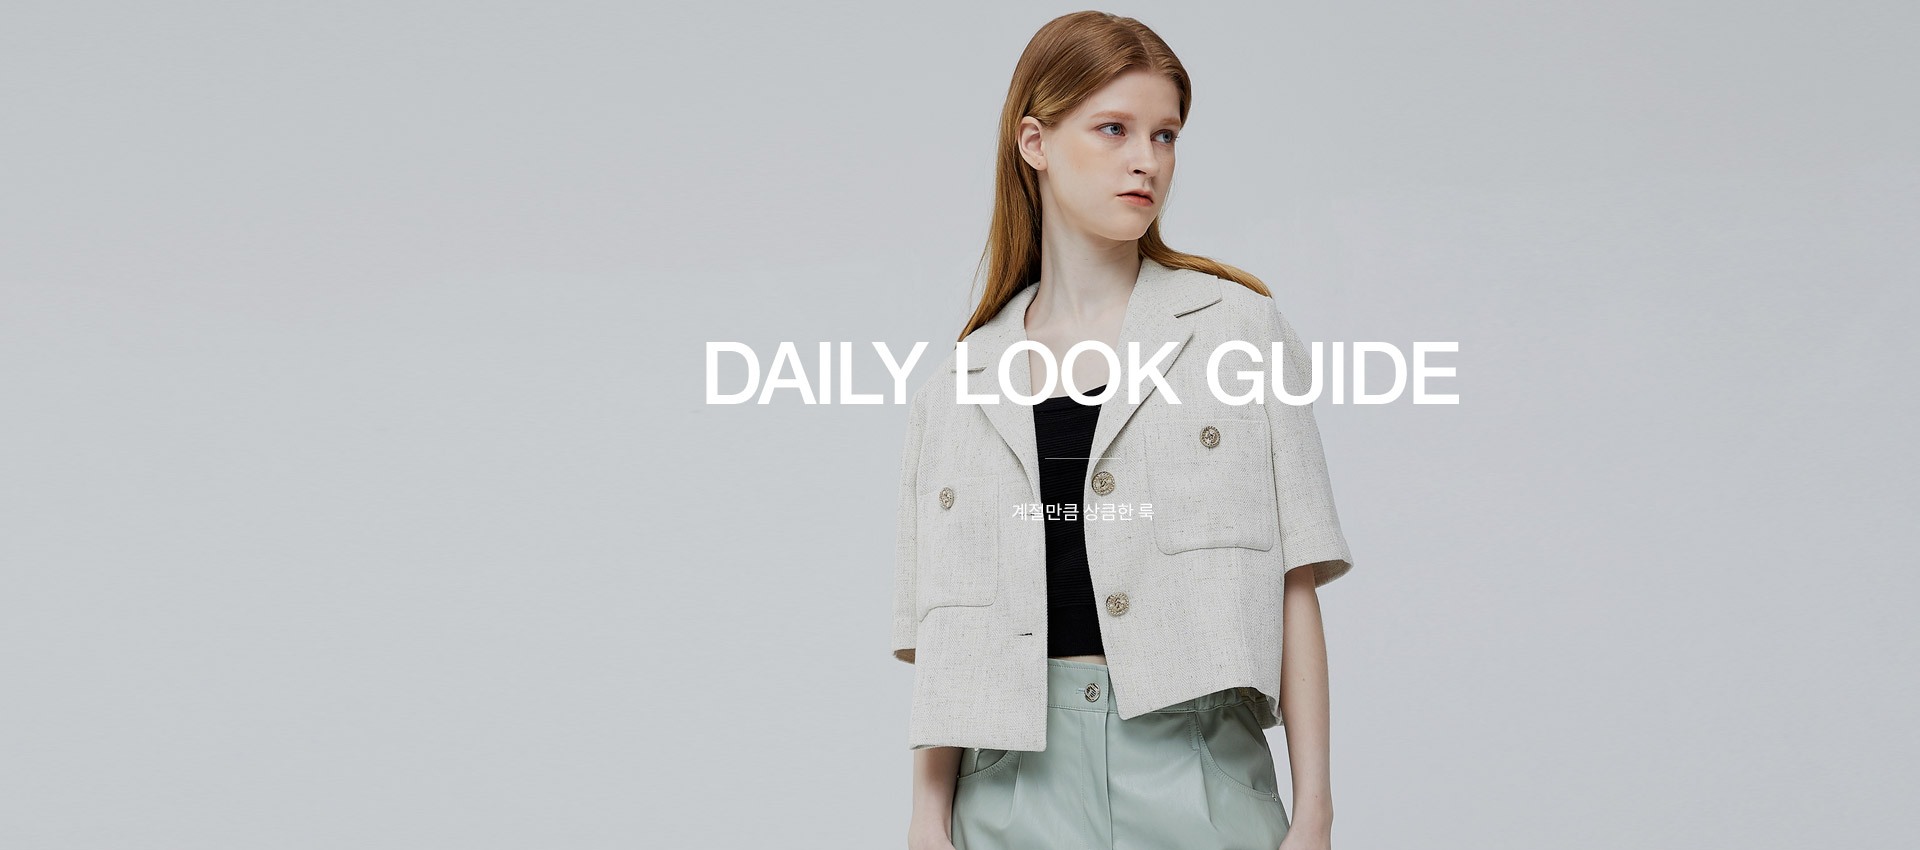 0_DAILY LOOK GUIDE_복사